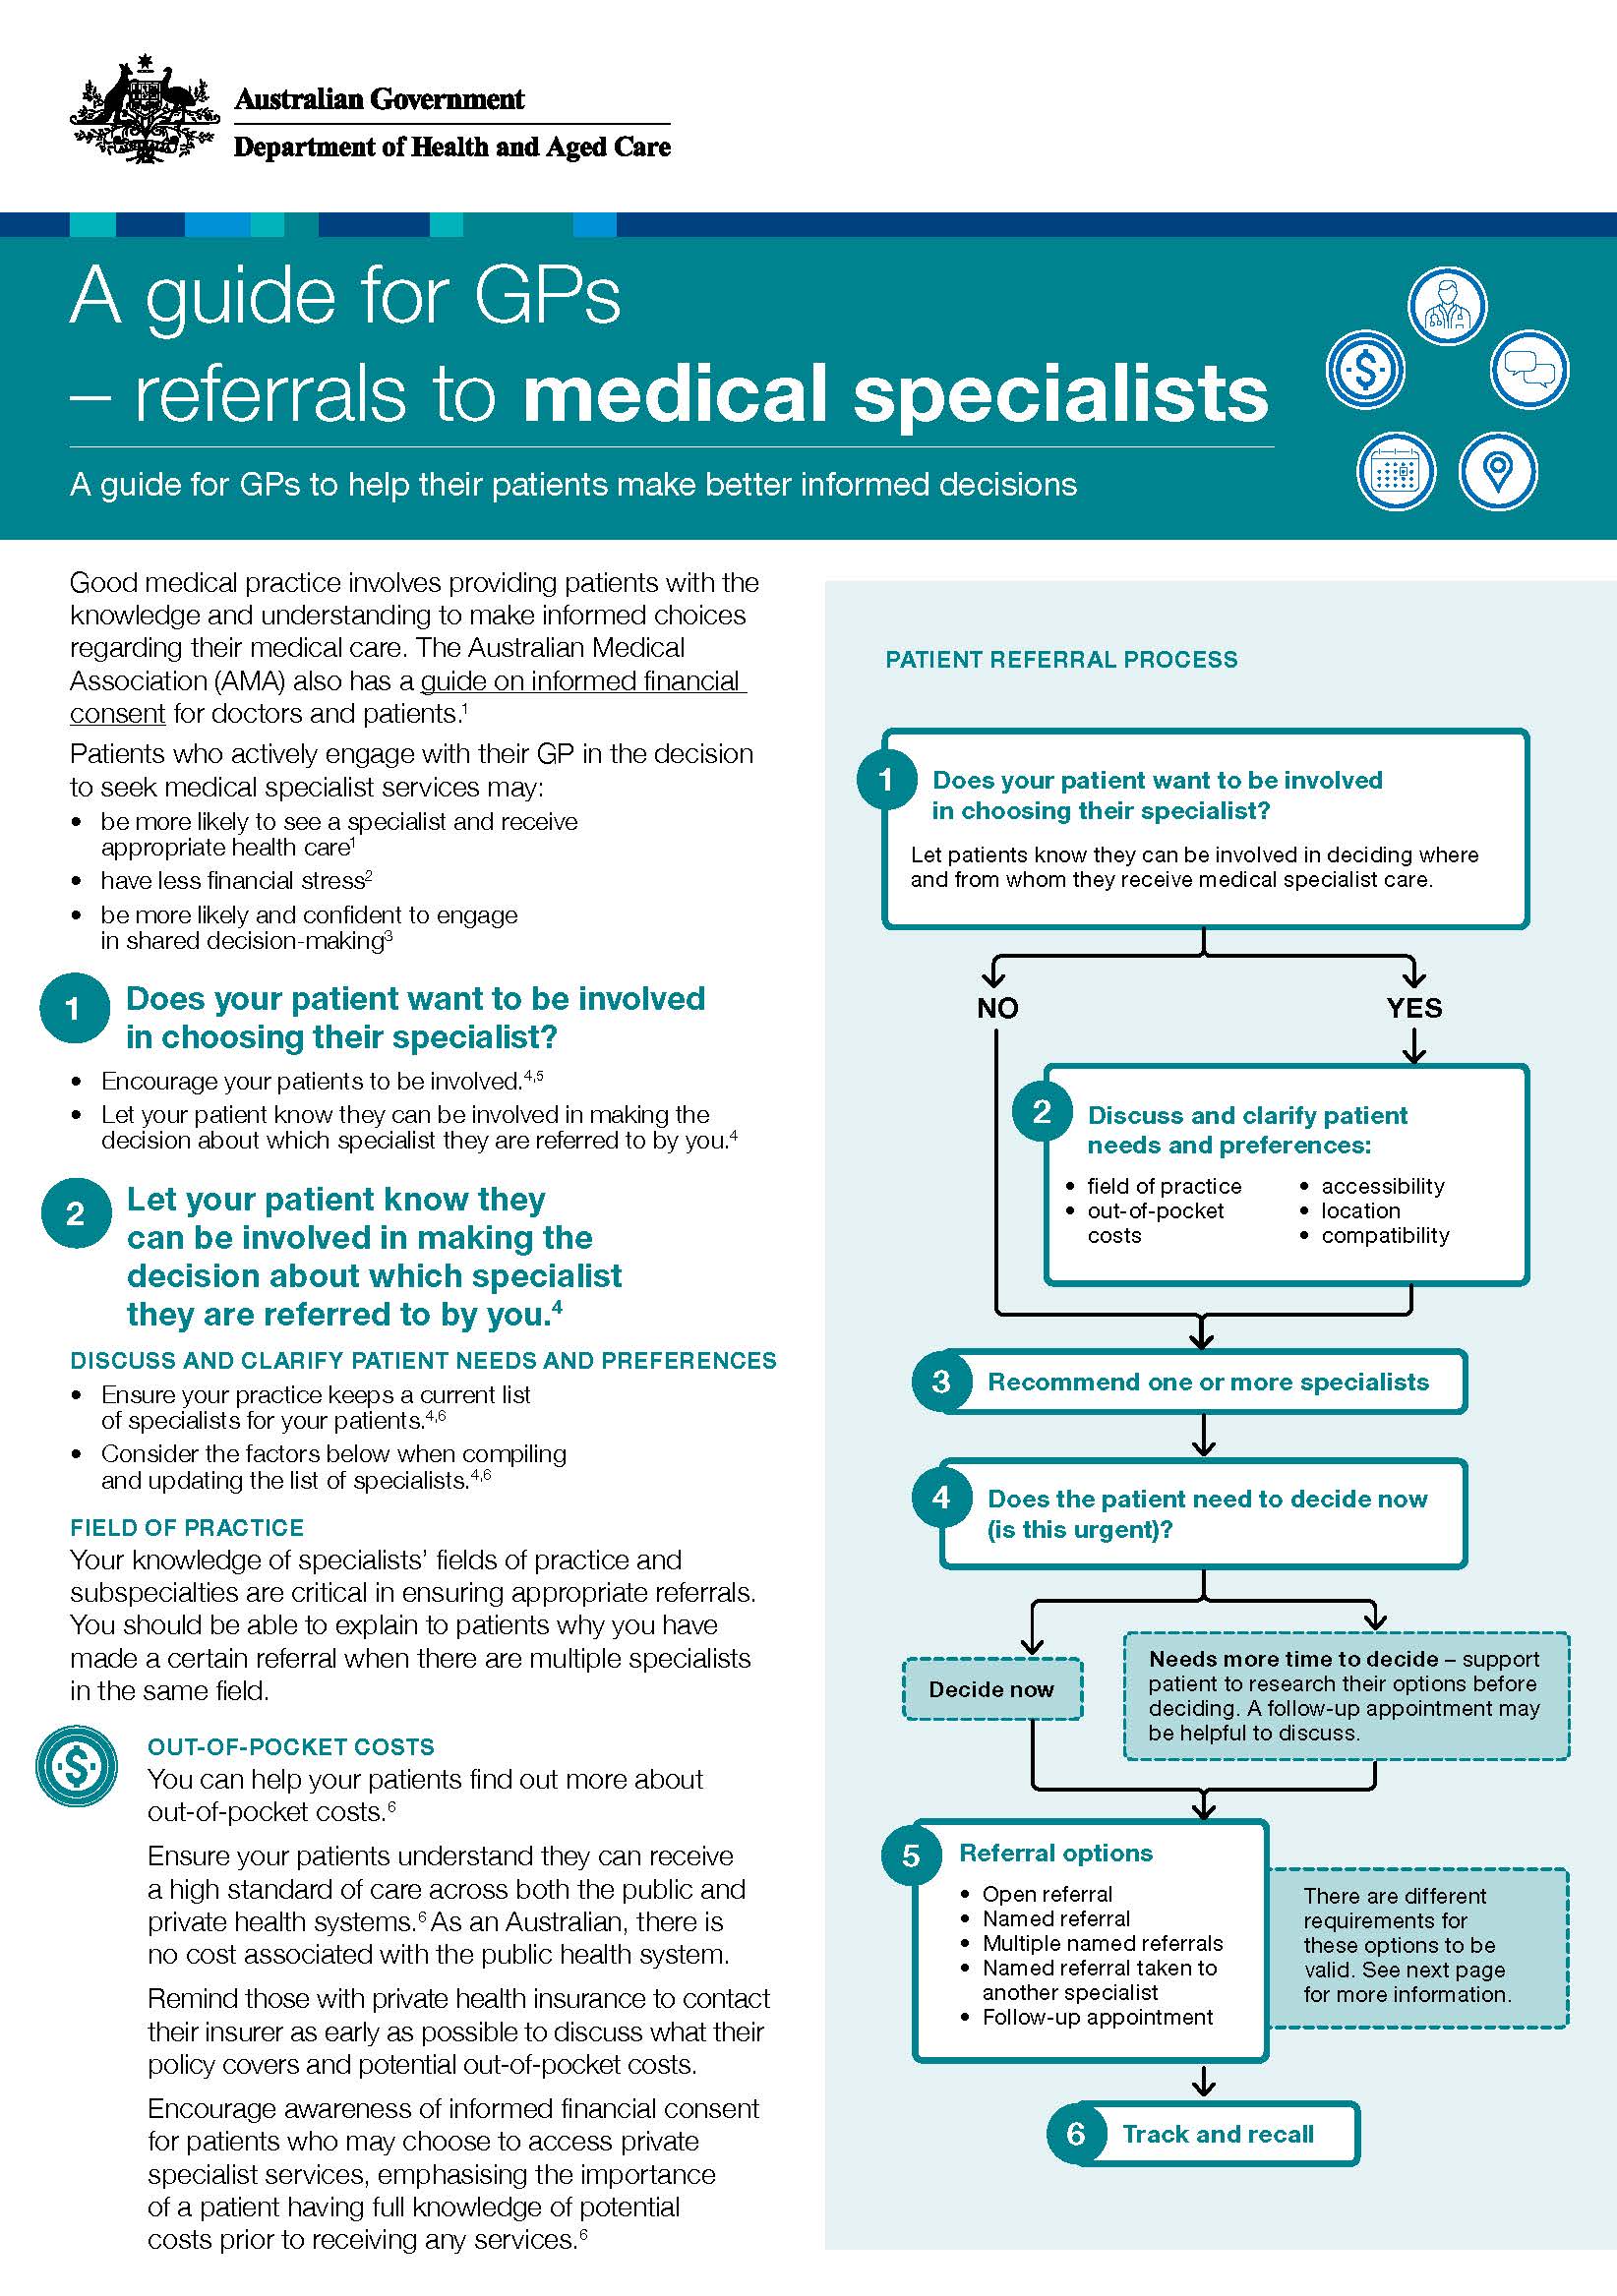 A guide for GPs - referrals to medical specialists